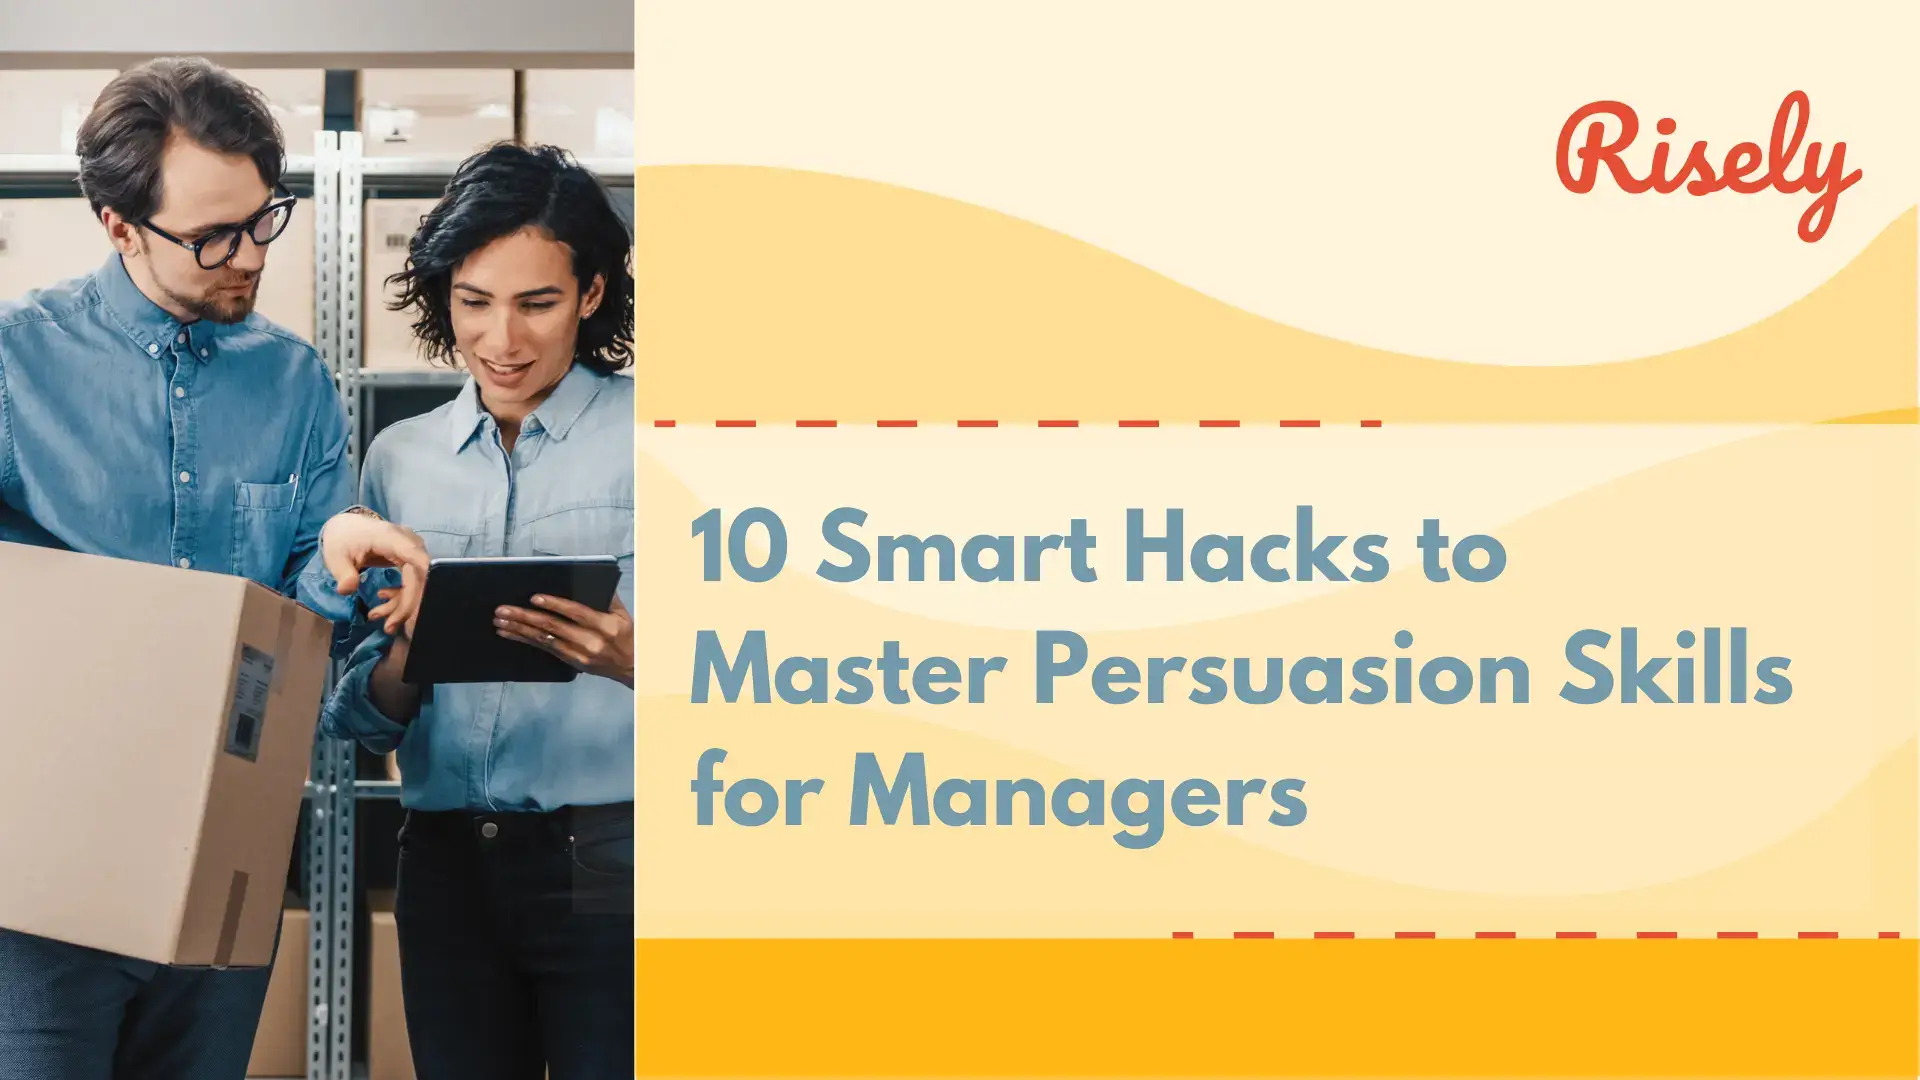 10 Smart Hacks to Master Persuasion Skills for Managers